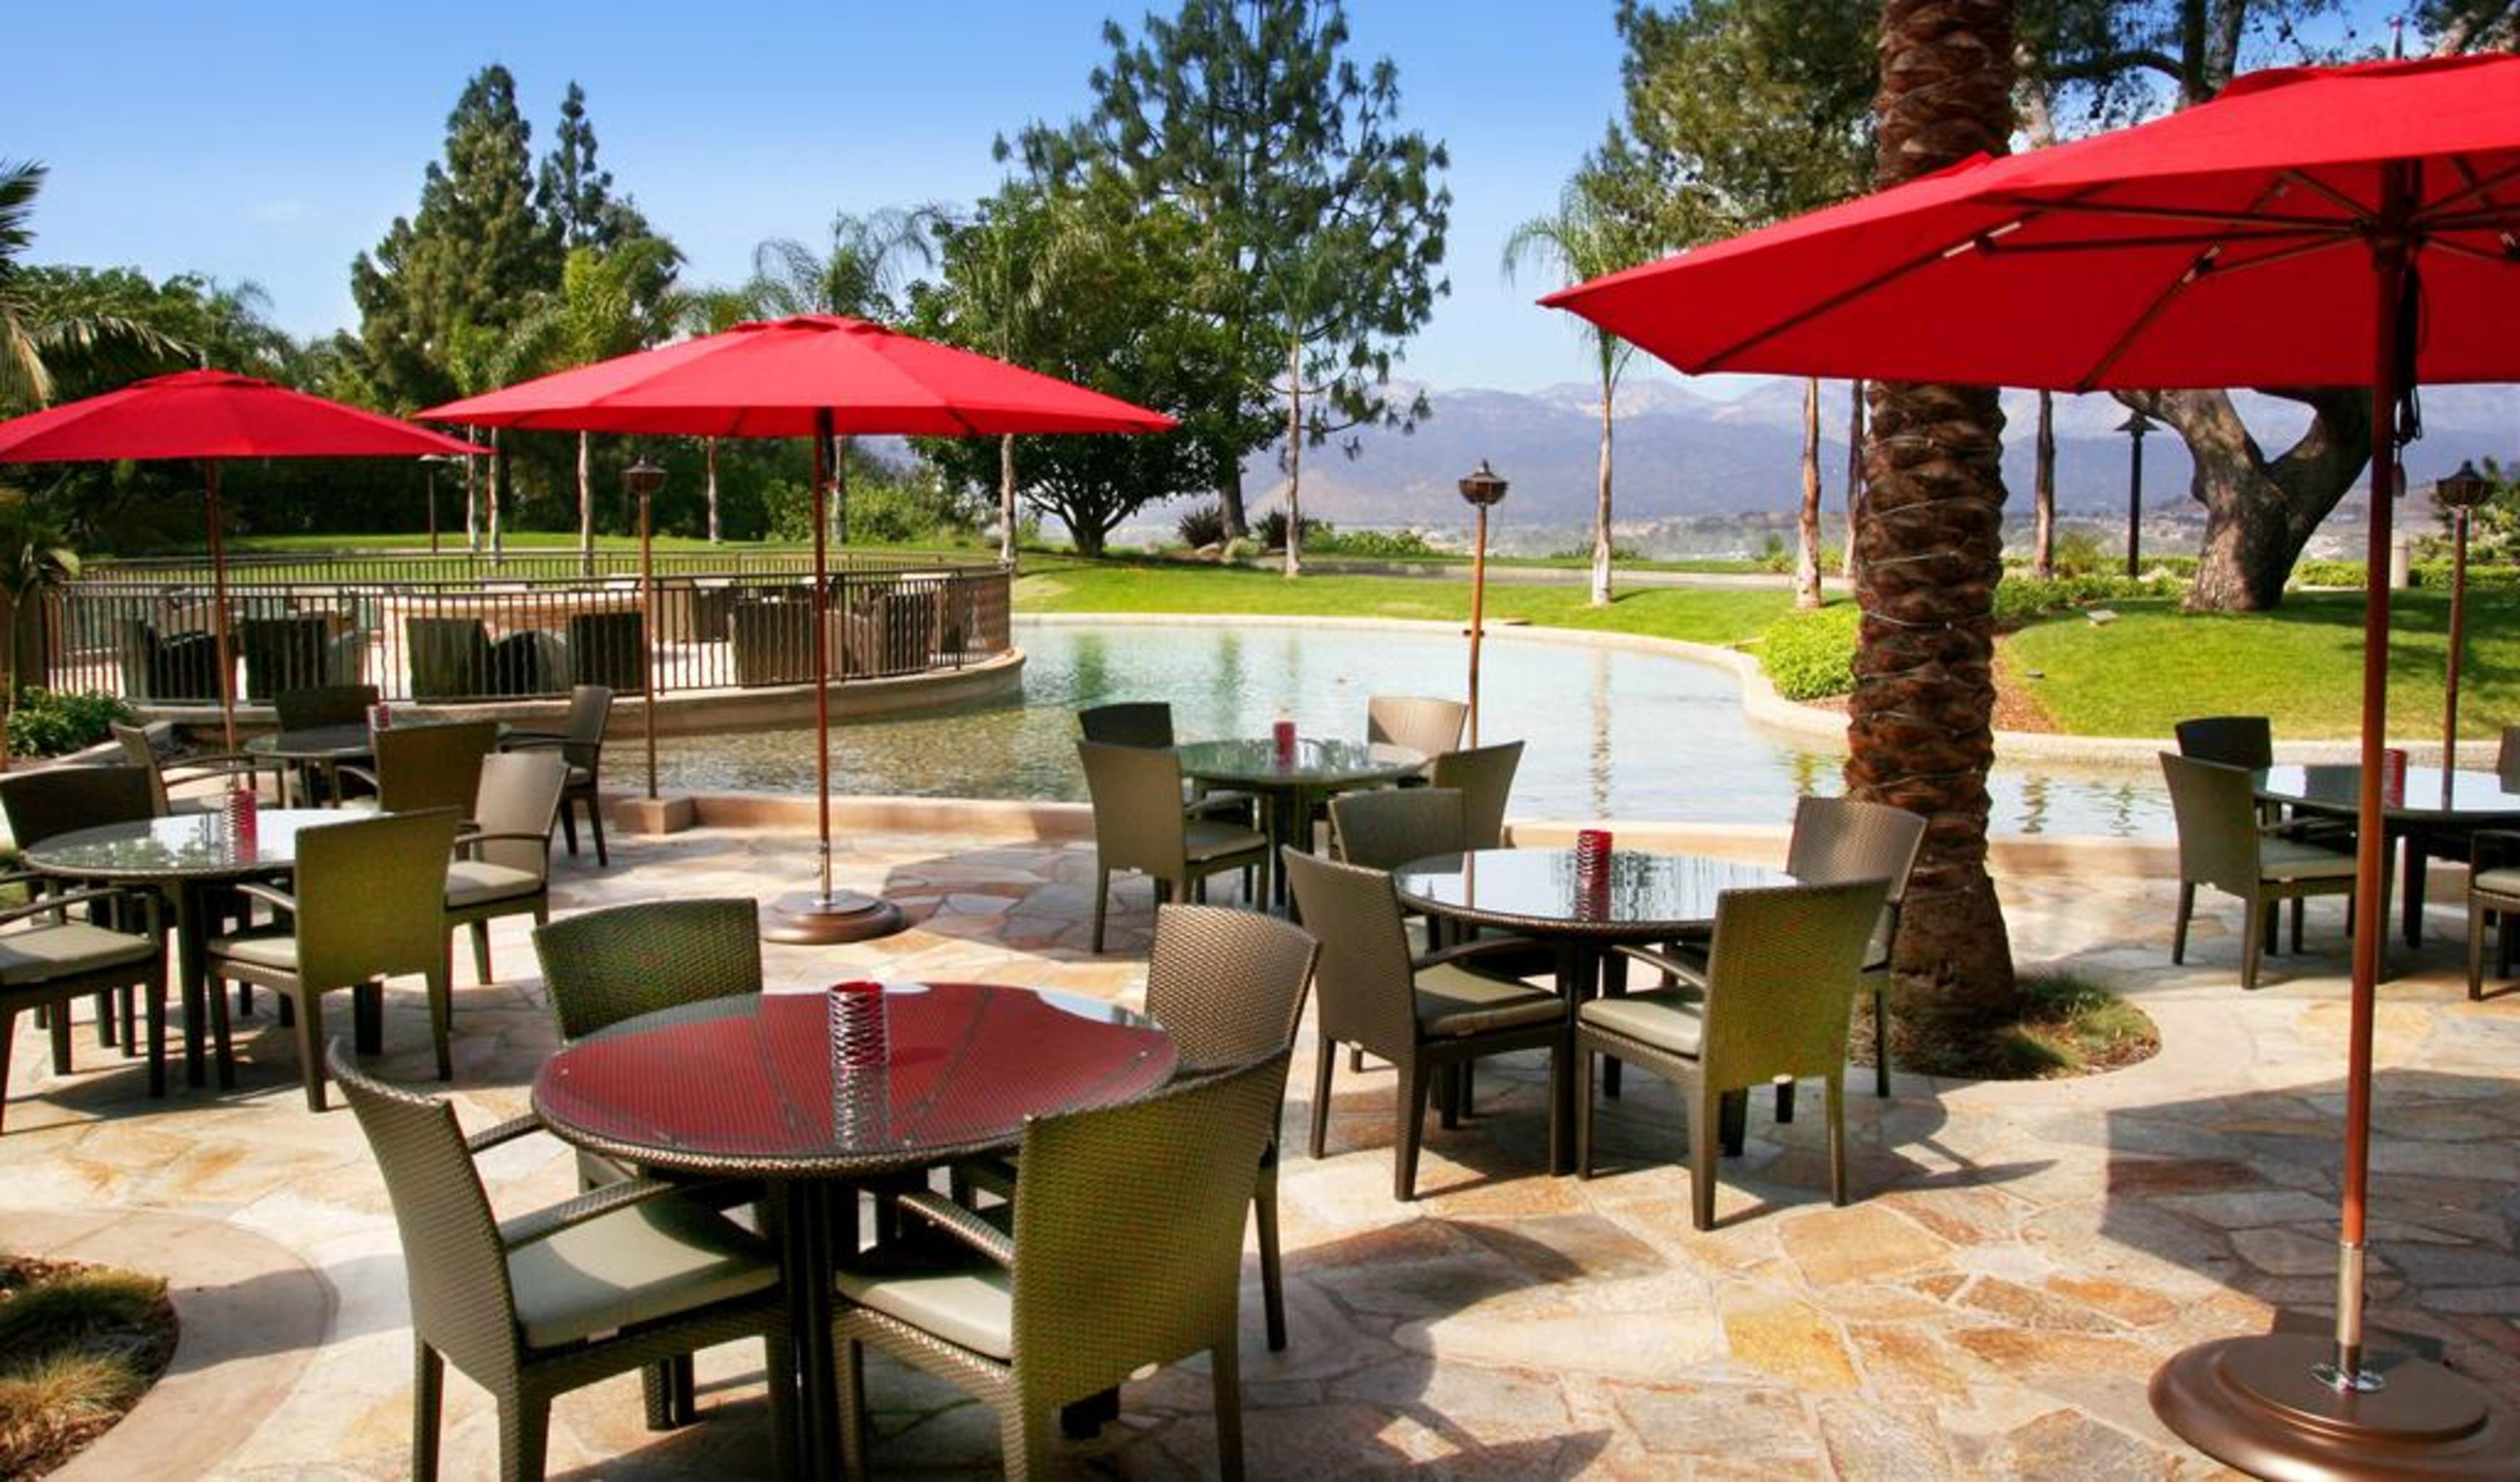 Pacific Palms Resort And Golf Club City of Industry Restaurant photo